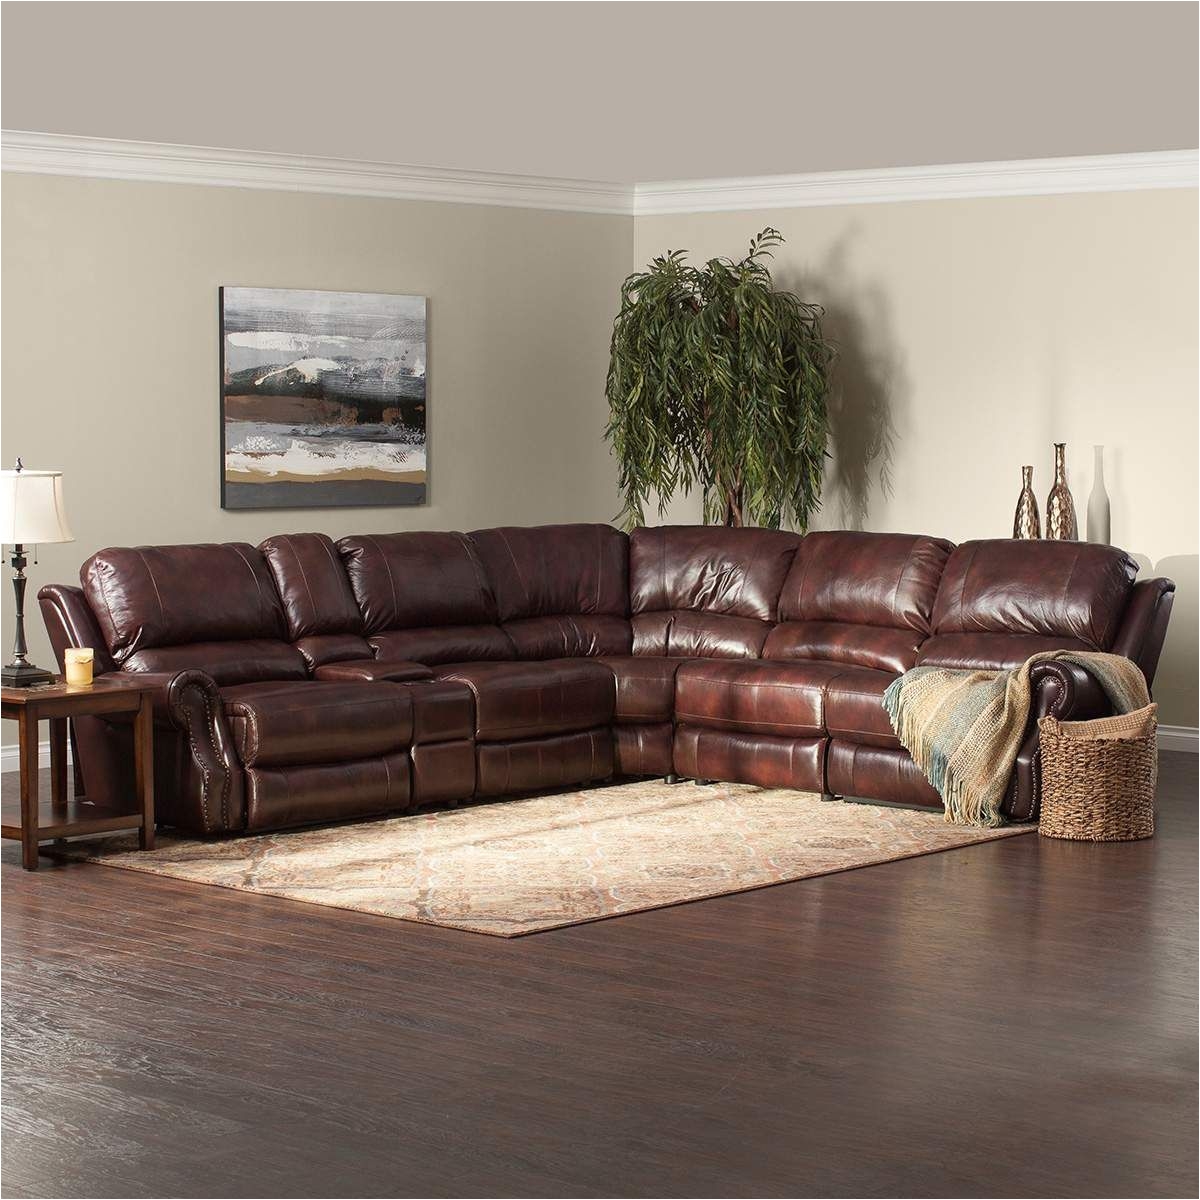 2899 99 jeromes the triton is a luxurious brown reclining sectional with buttery soft top grain leather seating traditional scoop rolled arms are